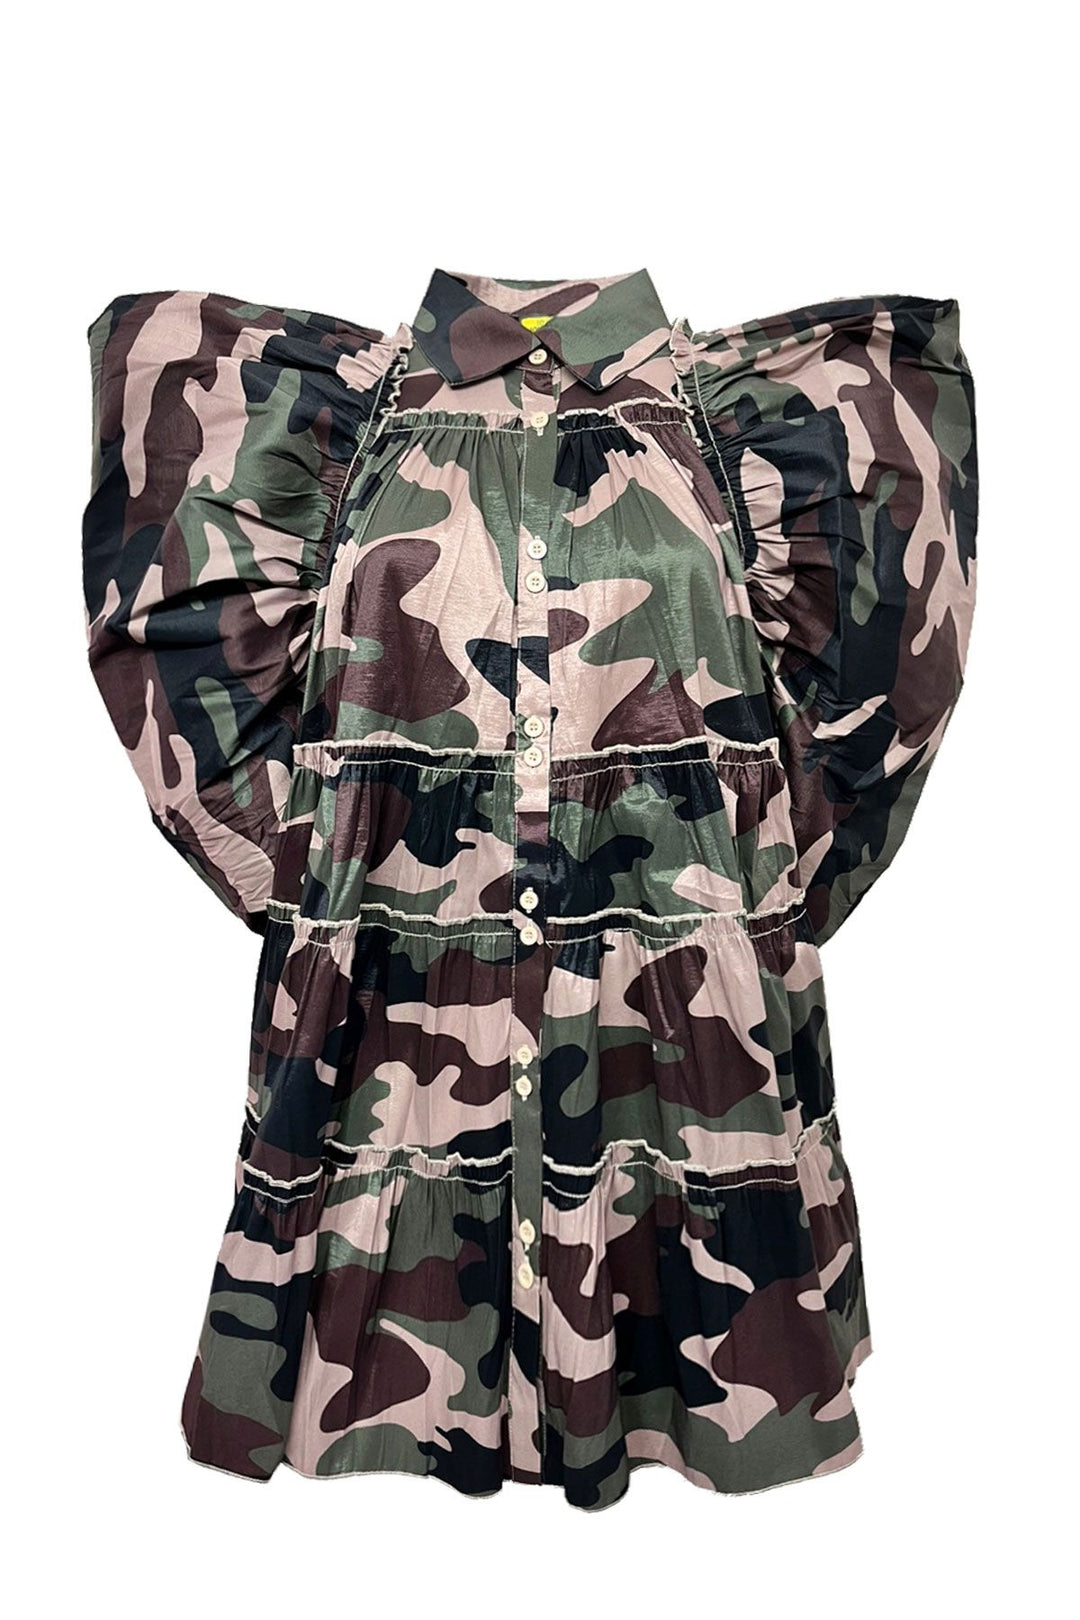 a green camo blouse with ruffles on the shoulders